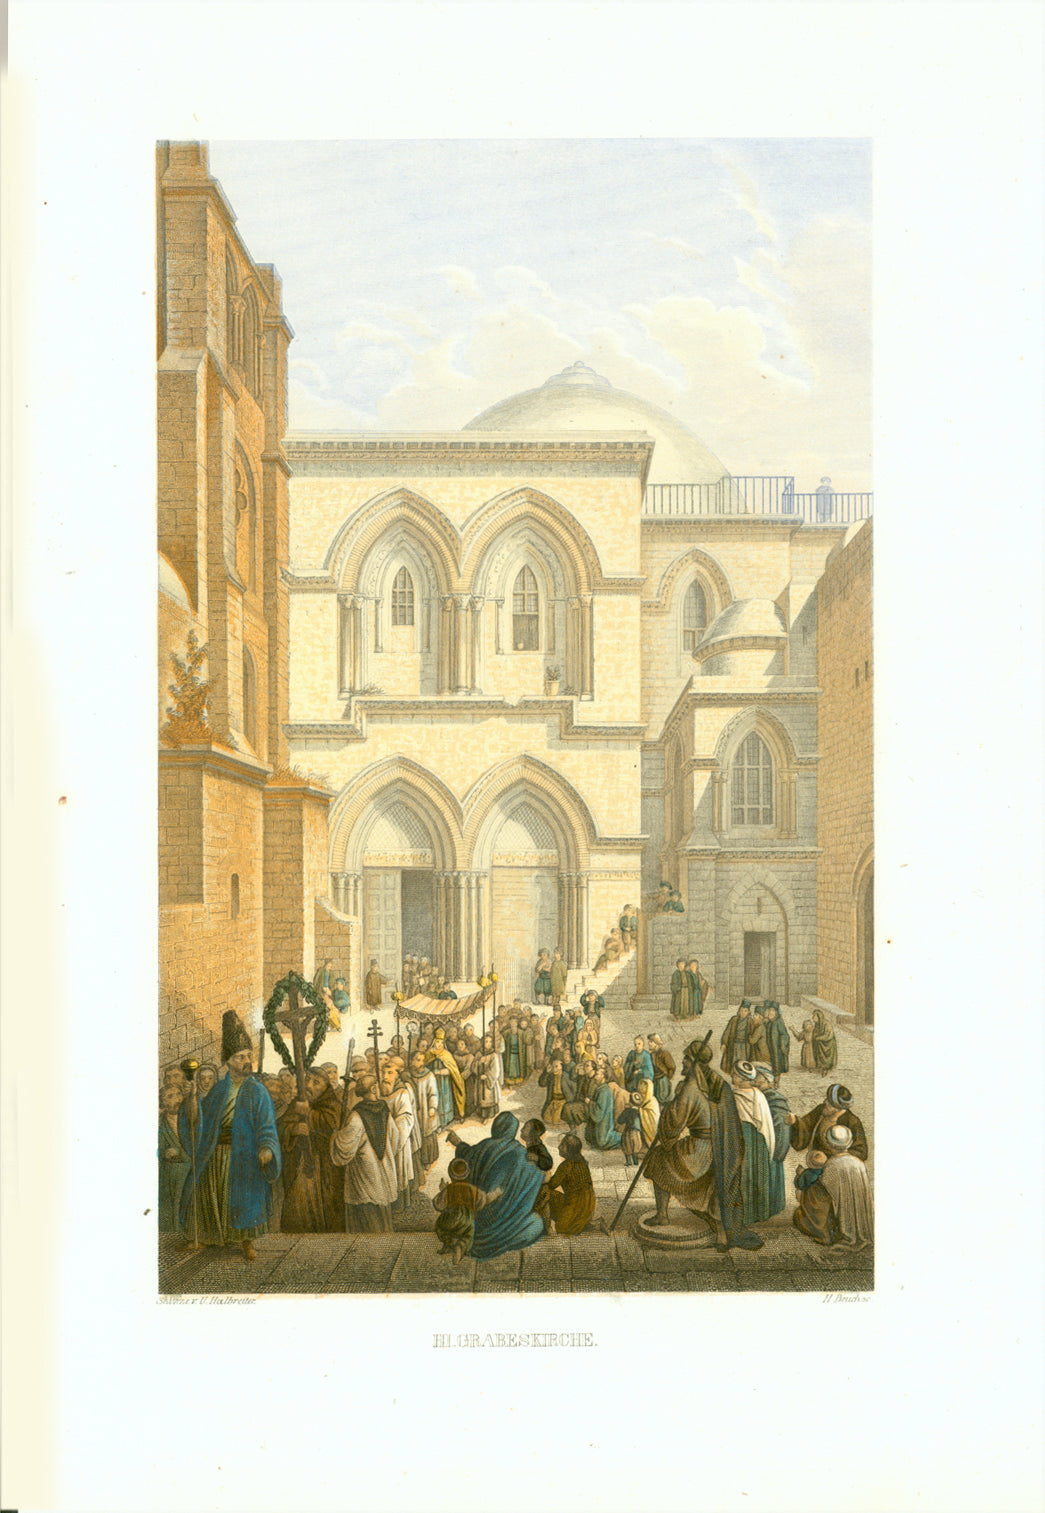 "Hl. Grabeskirche" (Church of the Holy Sepulchre)  Original antique print   Toned steel engraving with hand-colored highlights by Bruck after Halbreiter. Published 1861.